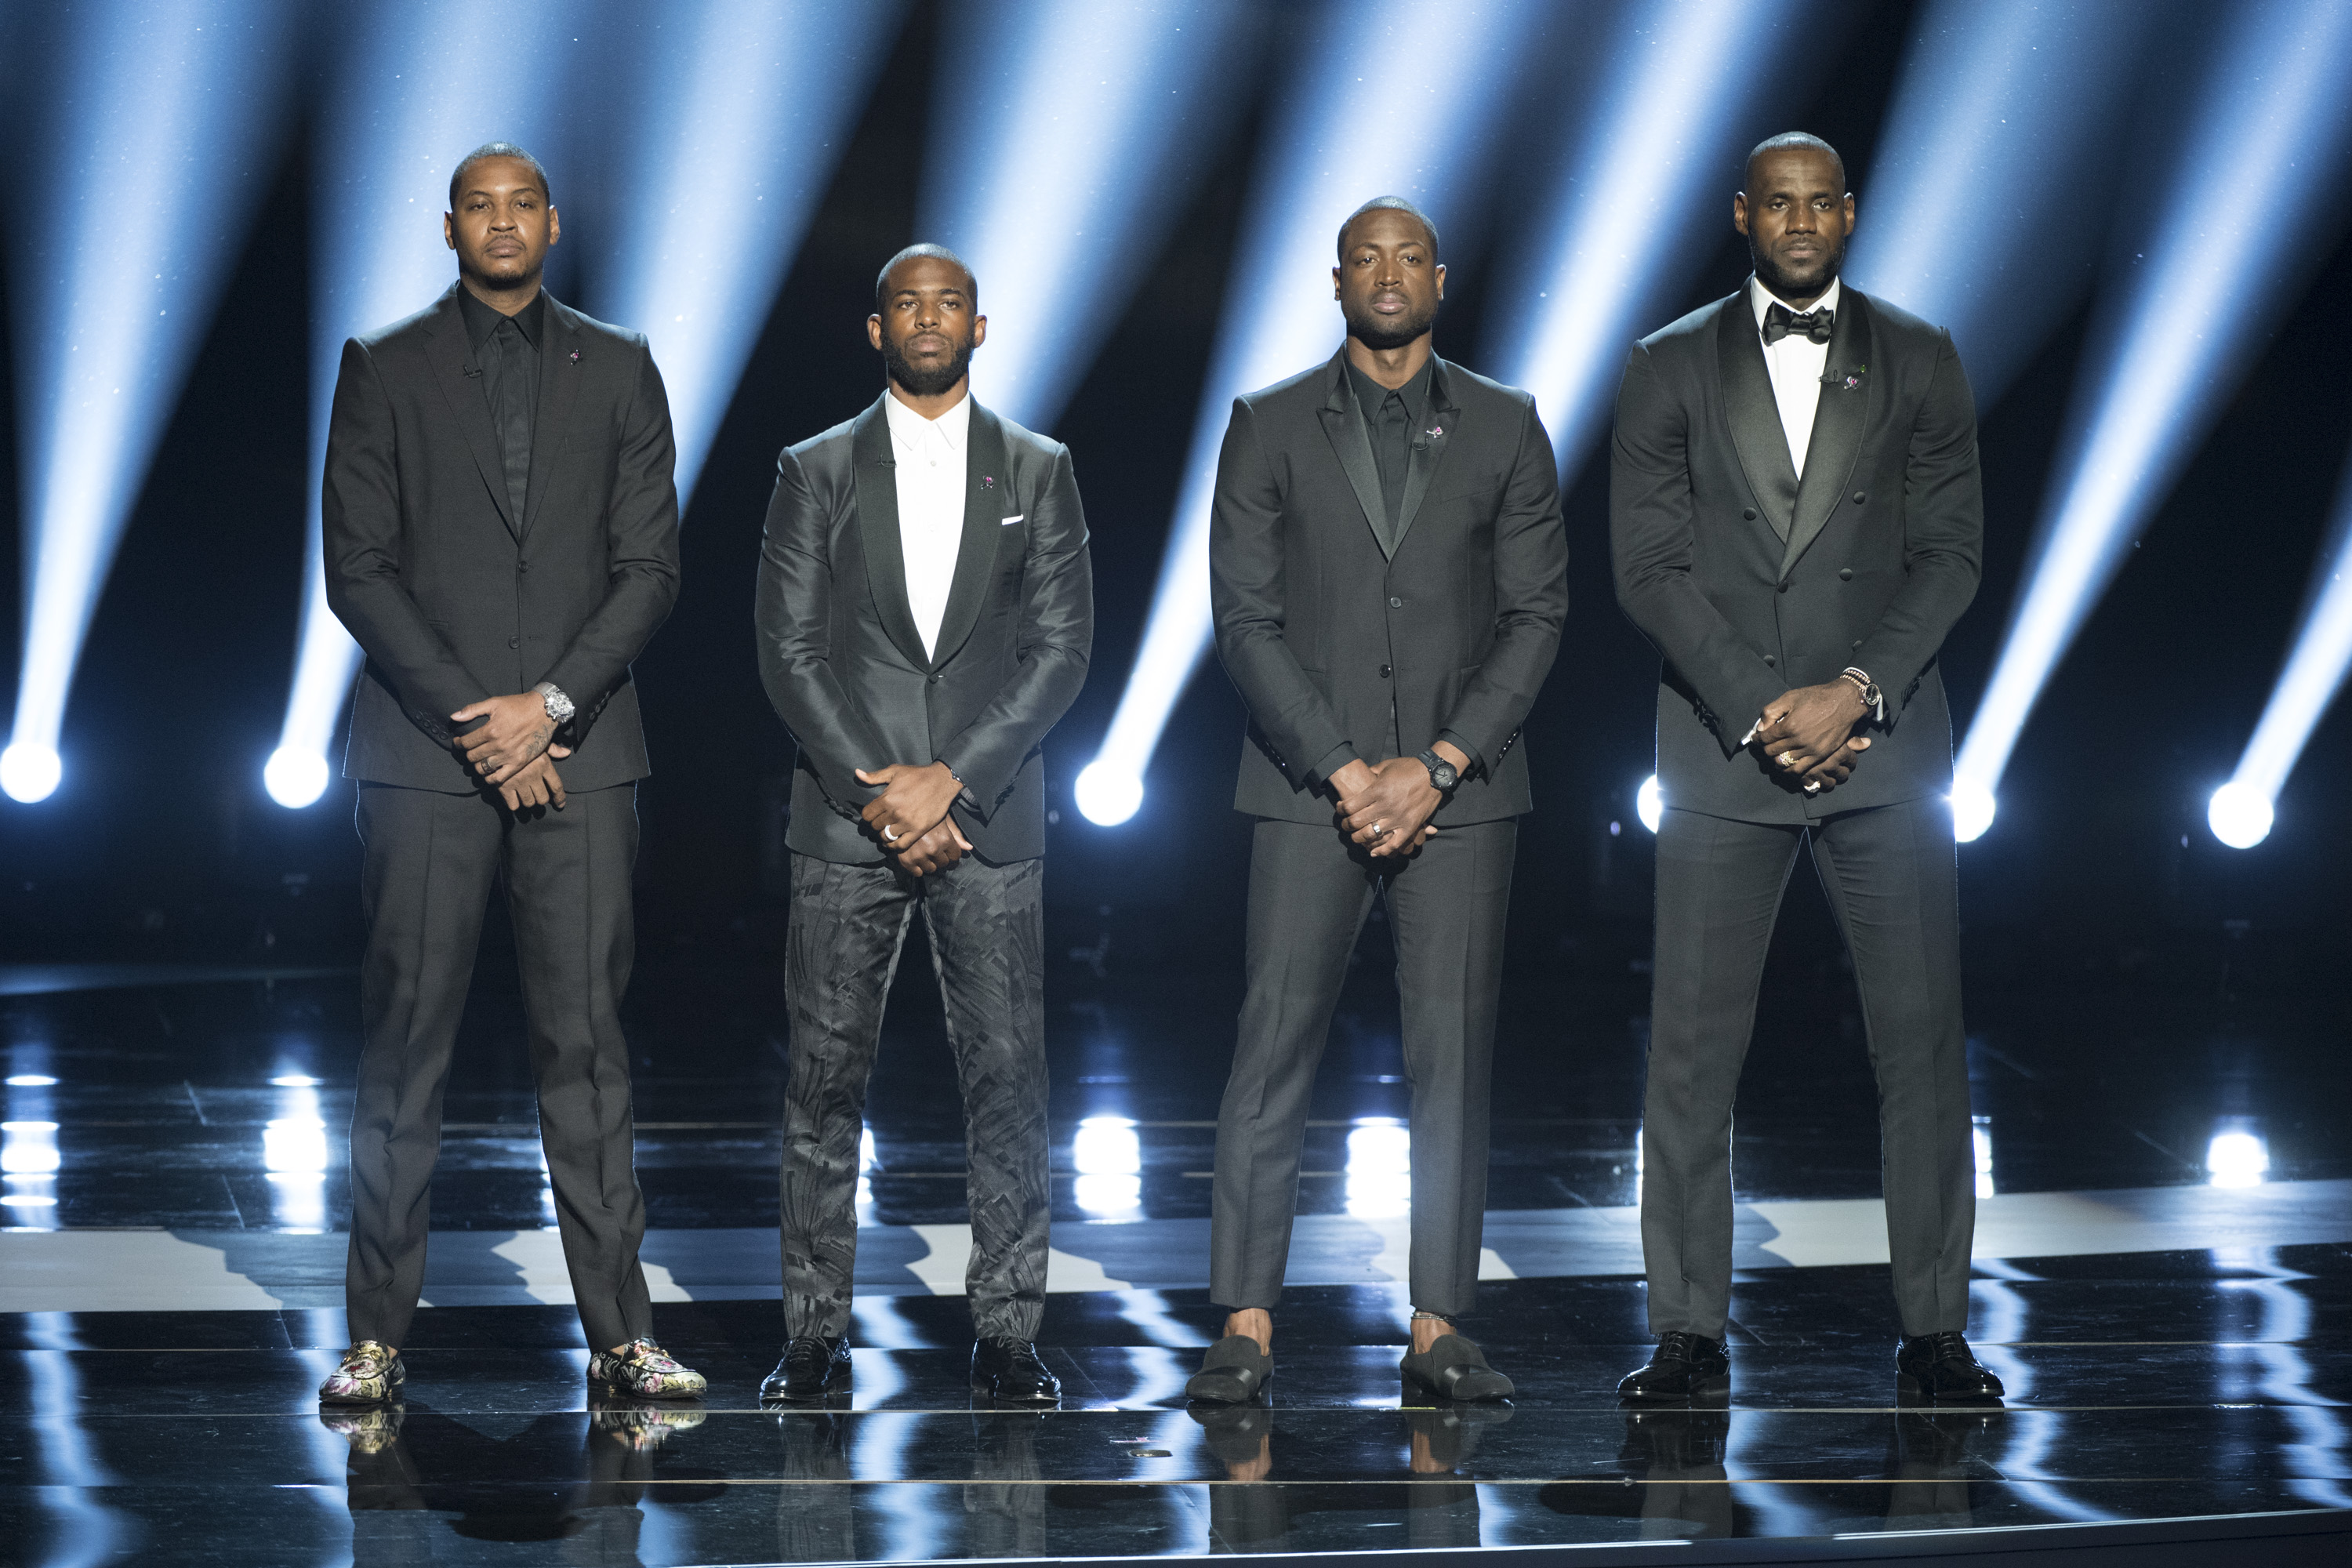 On July 13, Carmelo Anthony, Chris Paul, Dwyane Wade and LeBron James began the ESPYS with a call for justice. (Image Group LA—ABC via Getty Images)